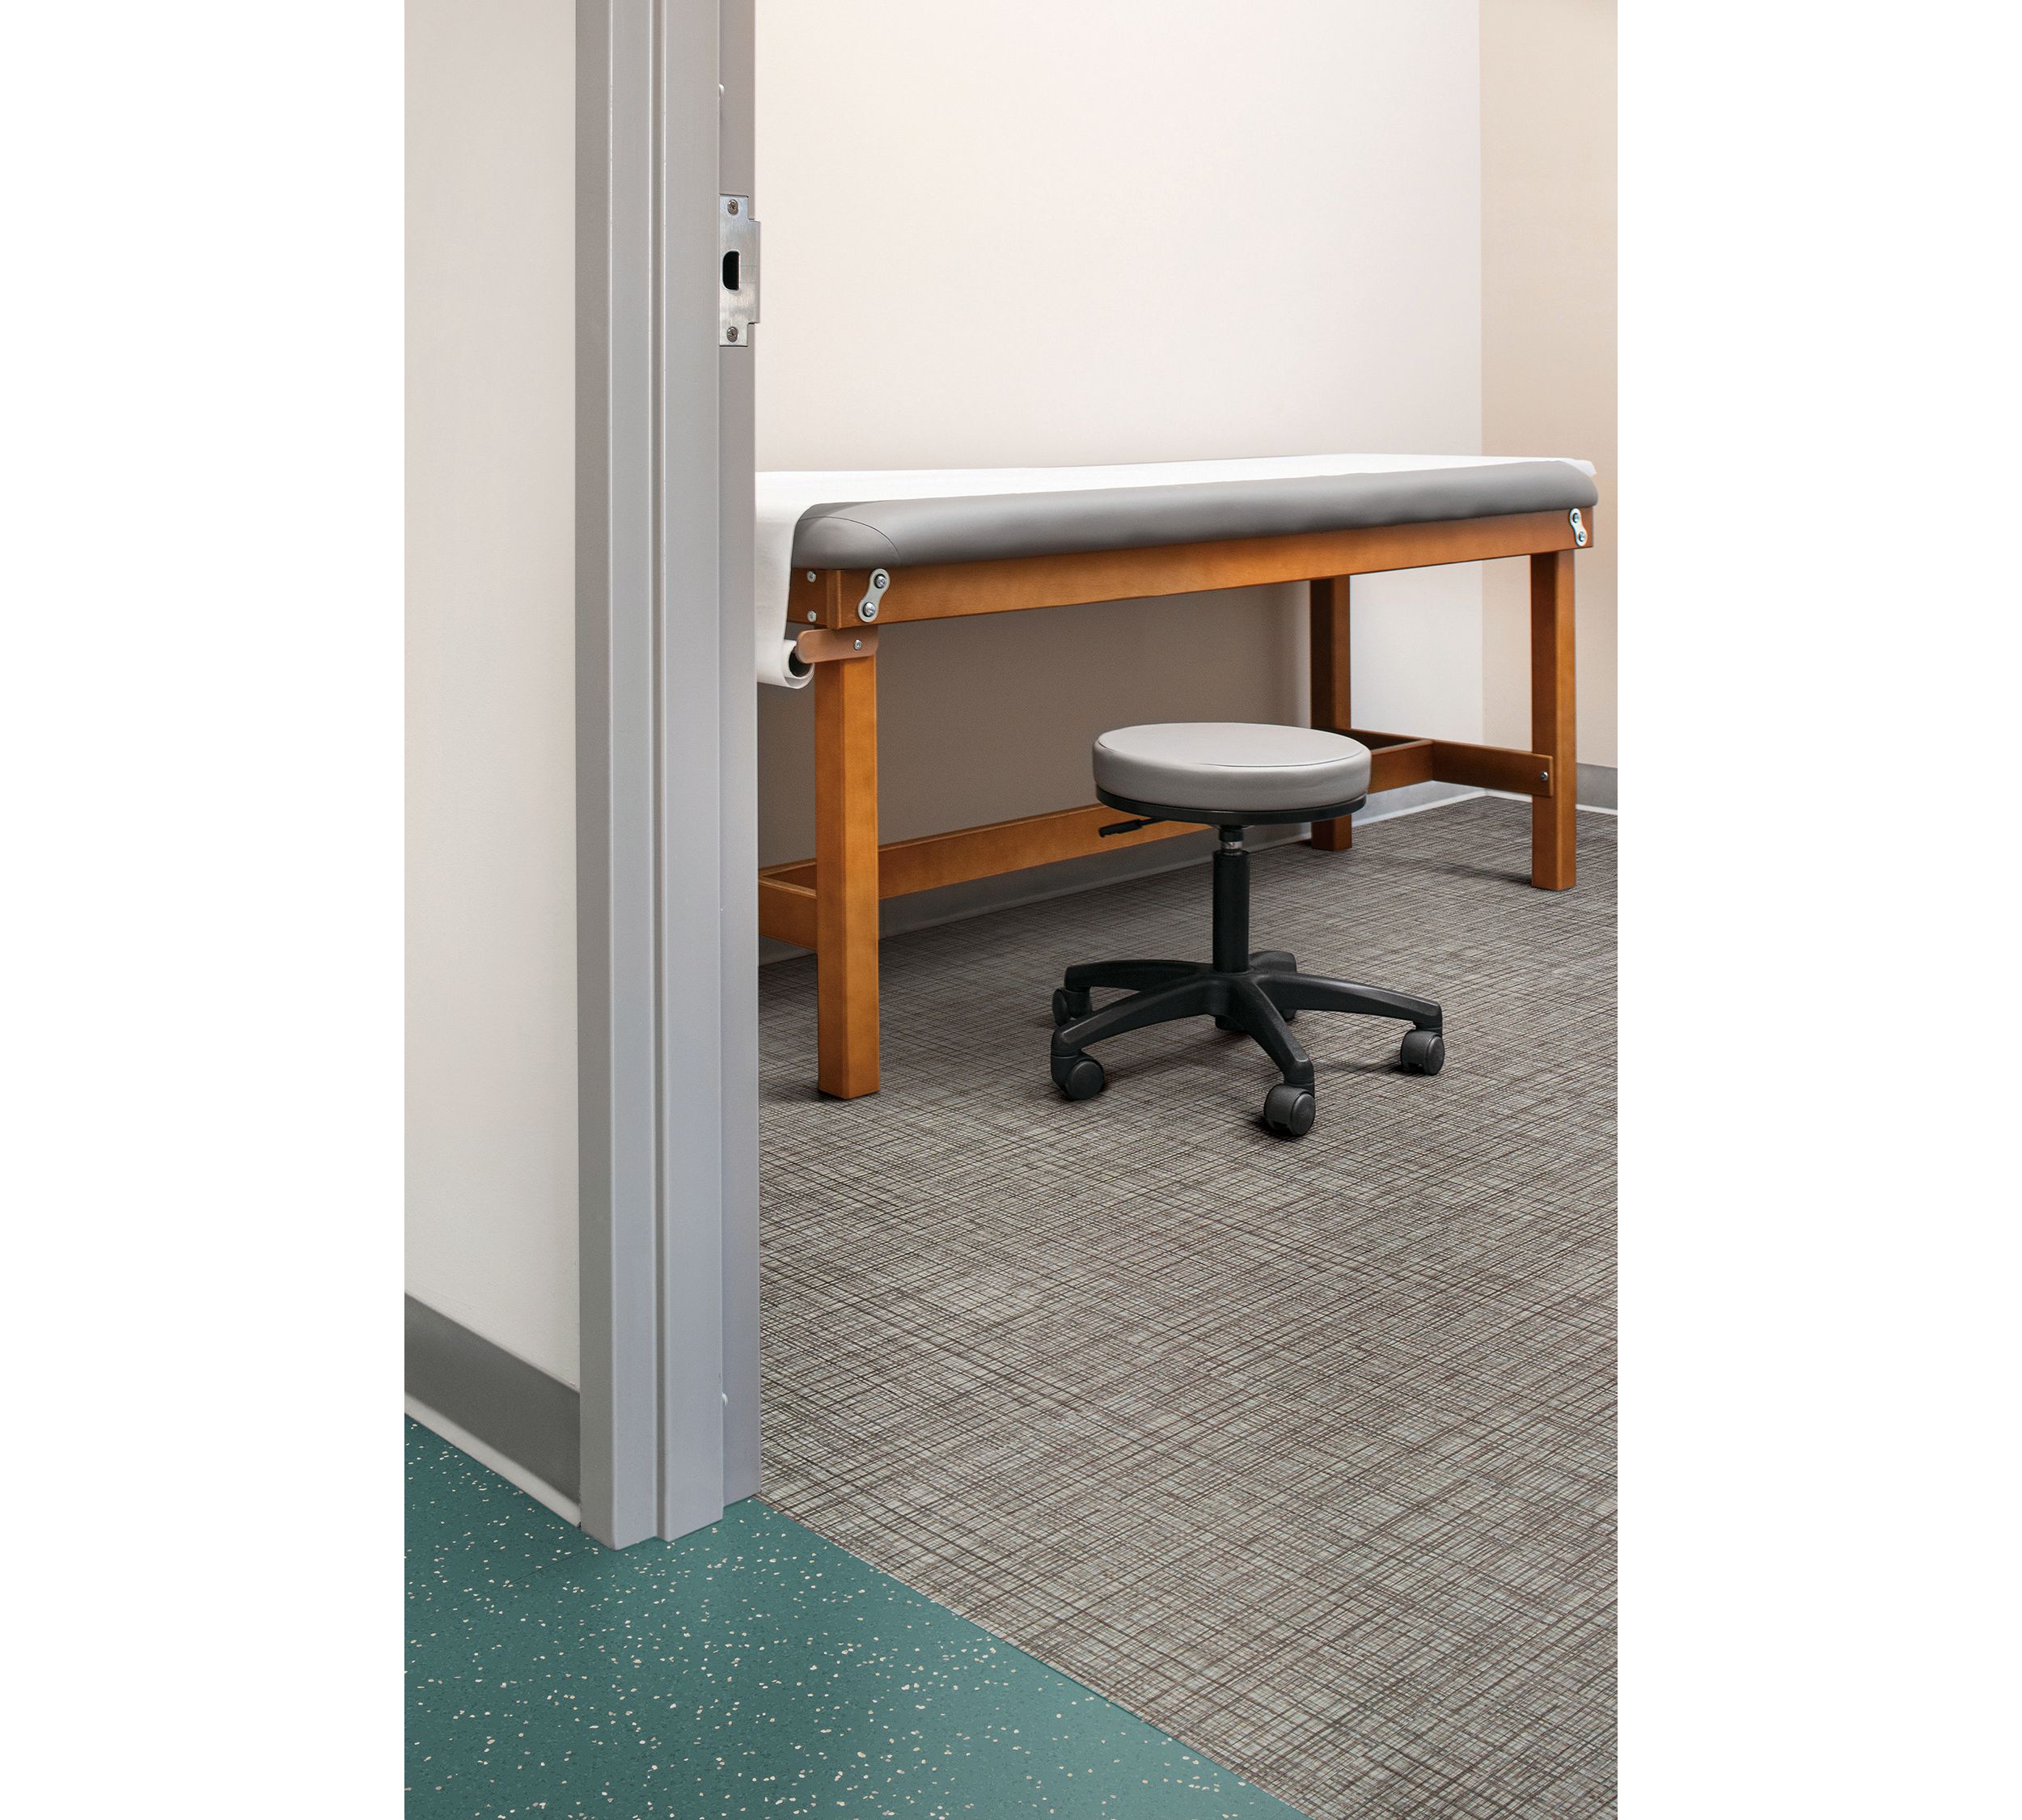 Interface Criterion Classic Wovens LVT and noraplan enironcare rubber flooring in patient room with table and rolling stool Bildnummer 4